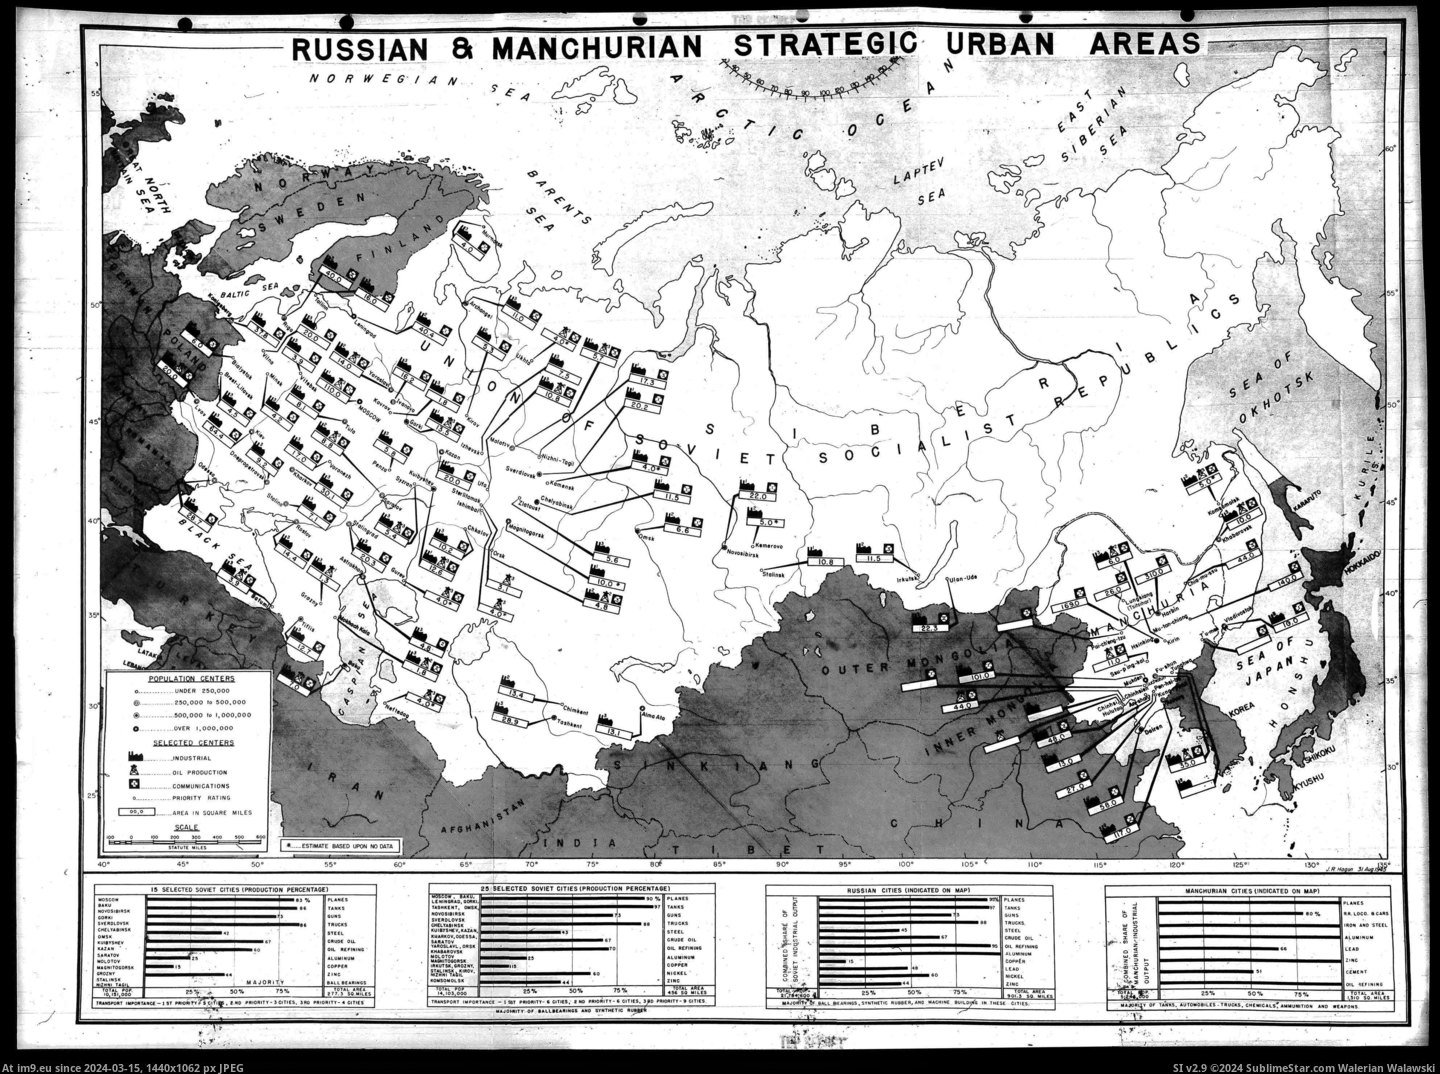 #Map #Russia #September #Strategic #Manchuria #Stockpile #Requirements #Atomic #Targets [Mapporn] The First Atomic Stockpile Requirements (September 1945), Map of strategic targets in Russia and Manchuria. [3972 x 29 Pic. (Image of album My r/MAPS favs))